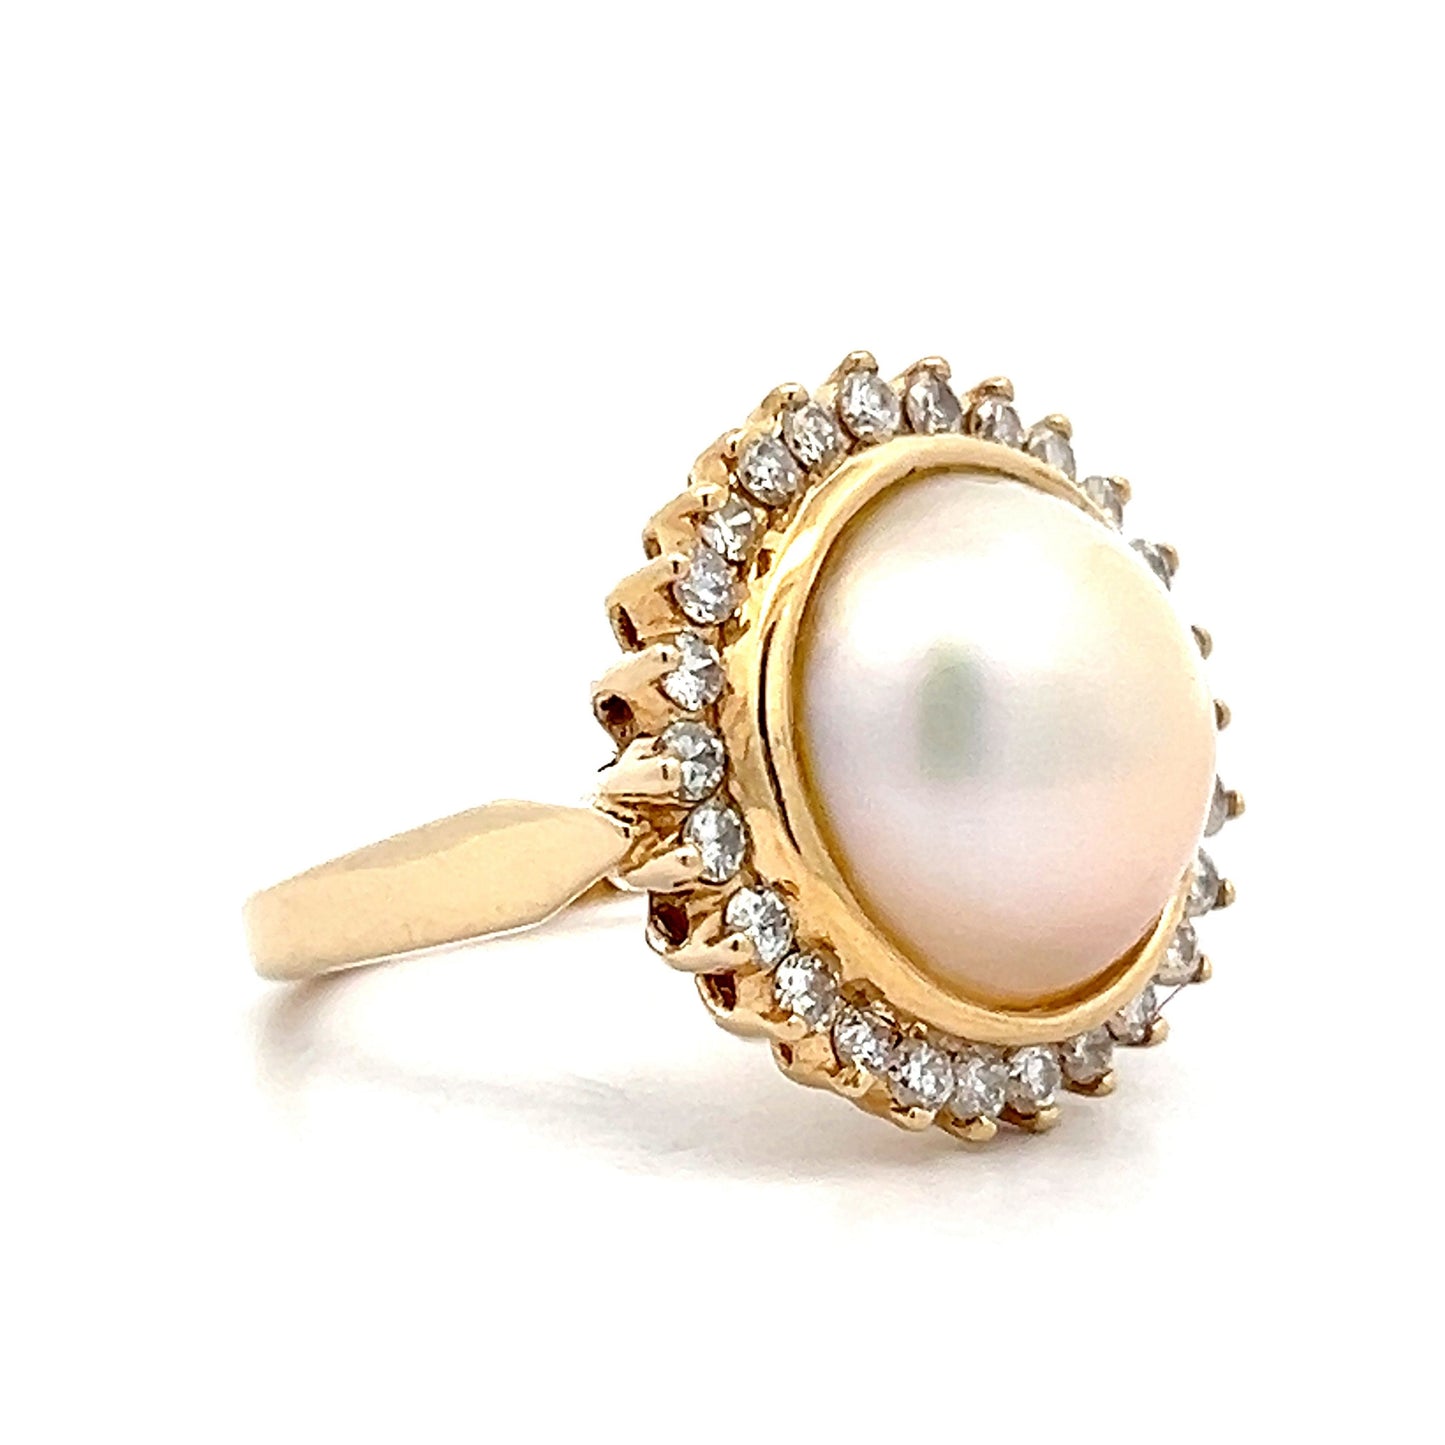 Pearl & Diamond Cocktail Ring in 14k Yellow Gold